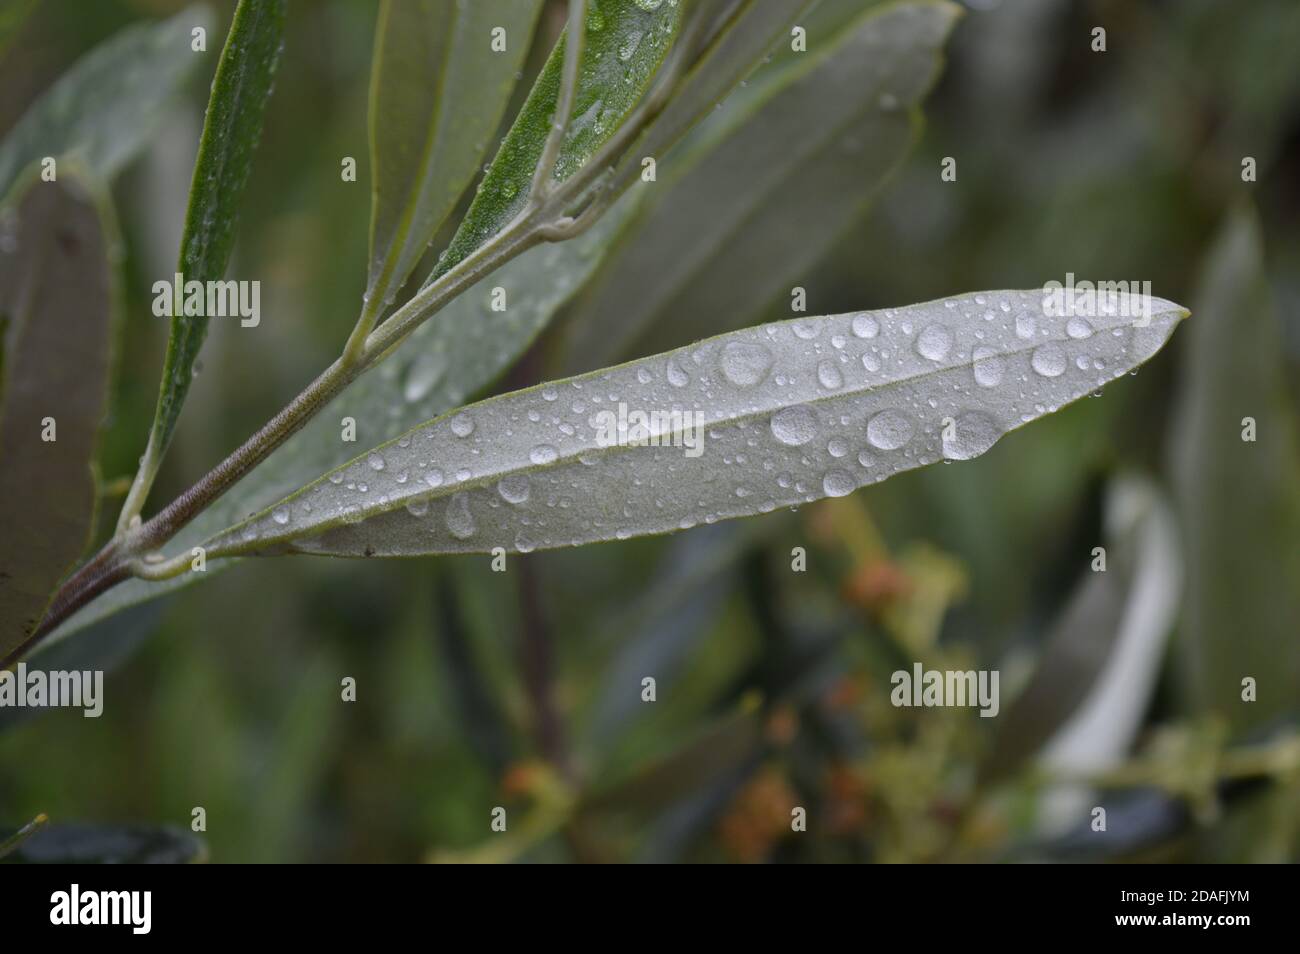 Olive Leaves  in the rain Stock Photo